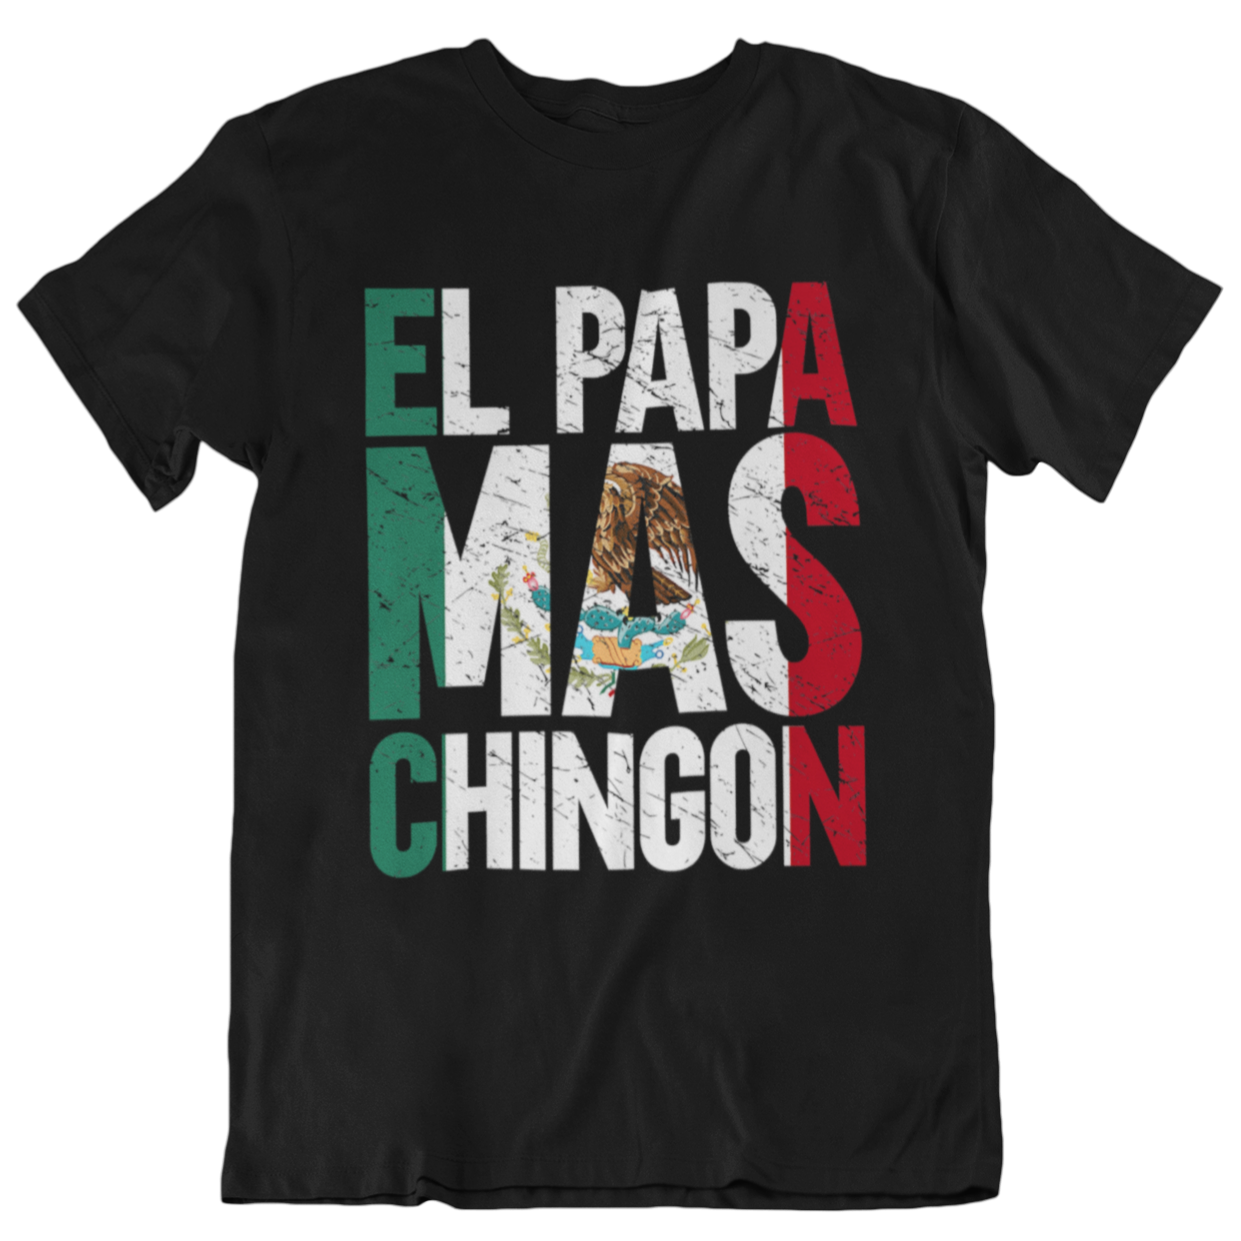 Mexican Black t-shirt featuring the phrase "El Papa Mas Chingon" wiyh a distressed Mexican flag in the large letters 